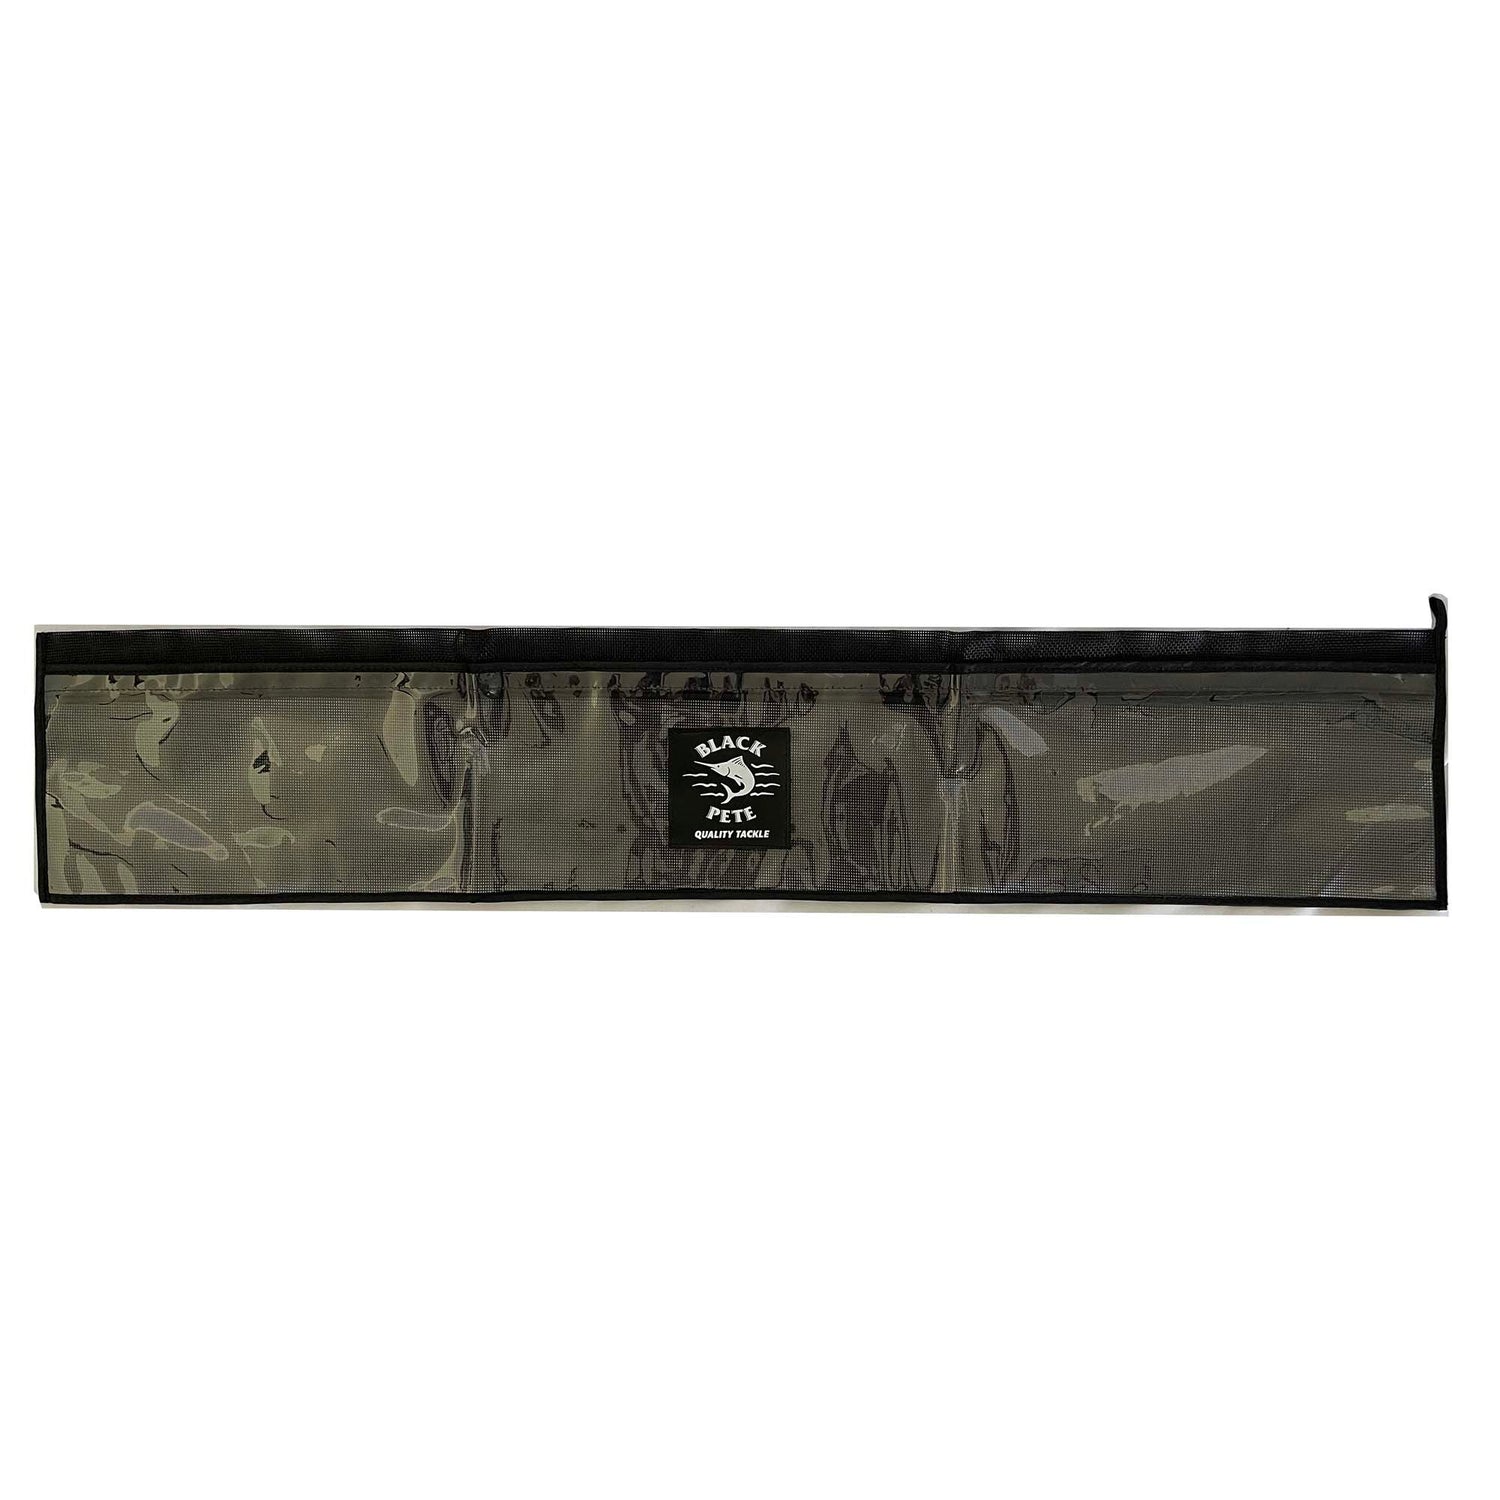 Black Pete Spreader Bar Pouch-Tackle Boxes & Bags-Black Pete-Fishing Station